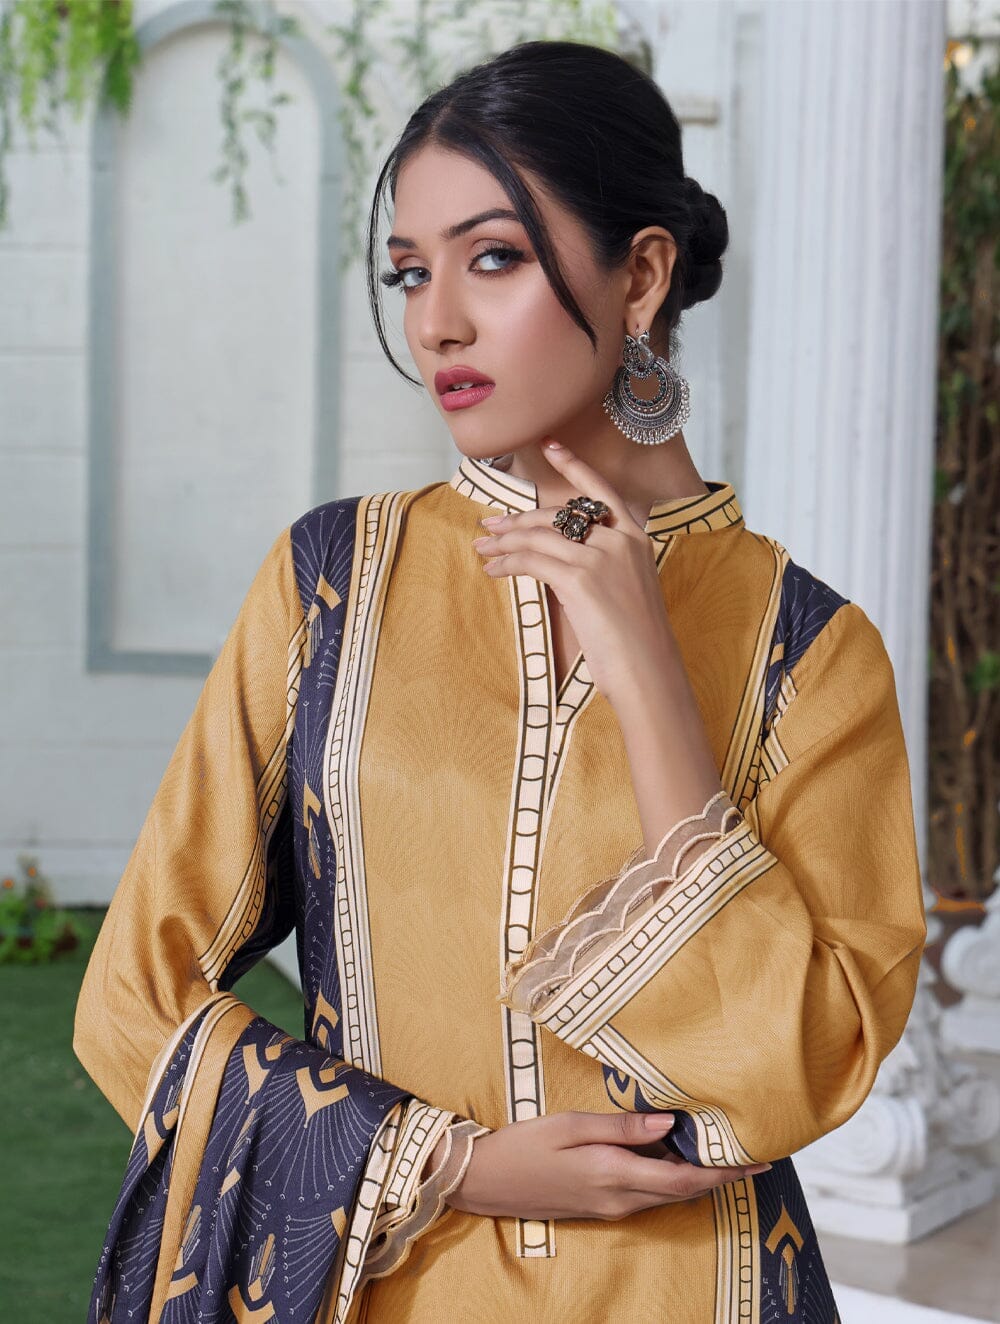 Printed Linen Suit with Printed Dupatta KTE-1643 KHAS STORES 